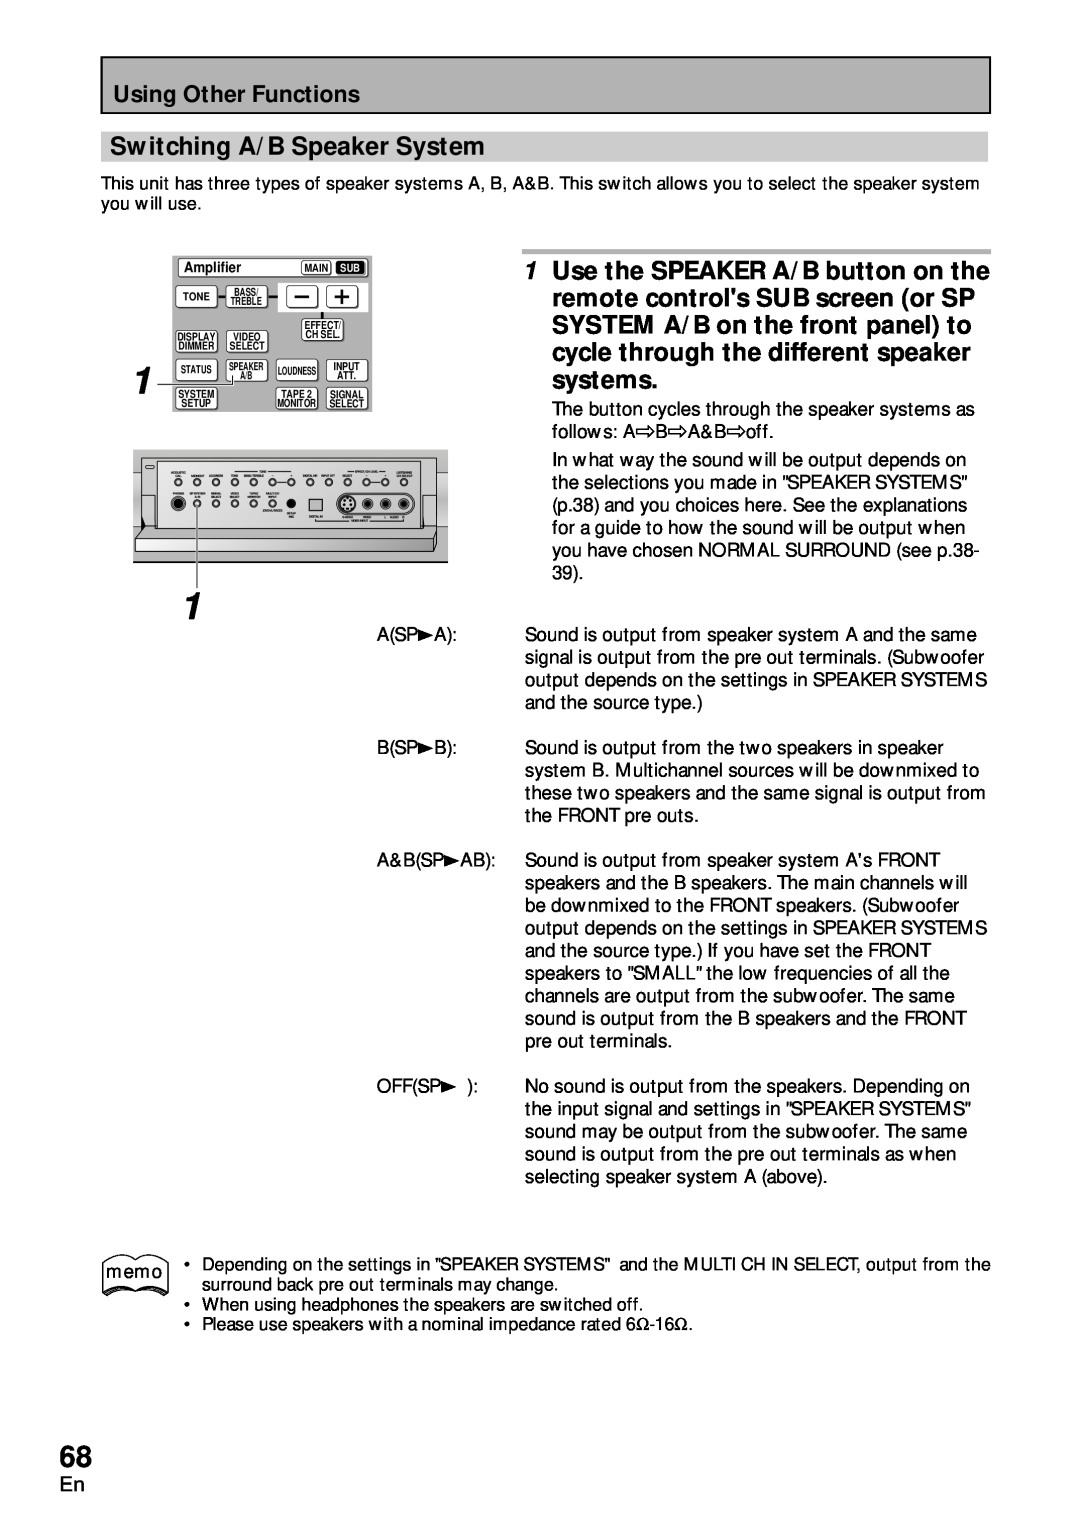 Pioneer VSA-AX10 operating instructions Switching A/B Speaker System, systems 